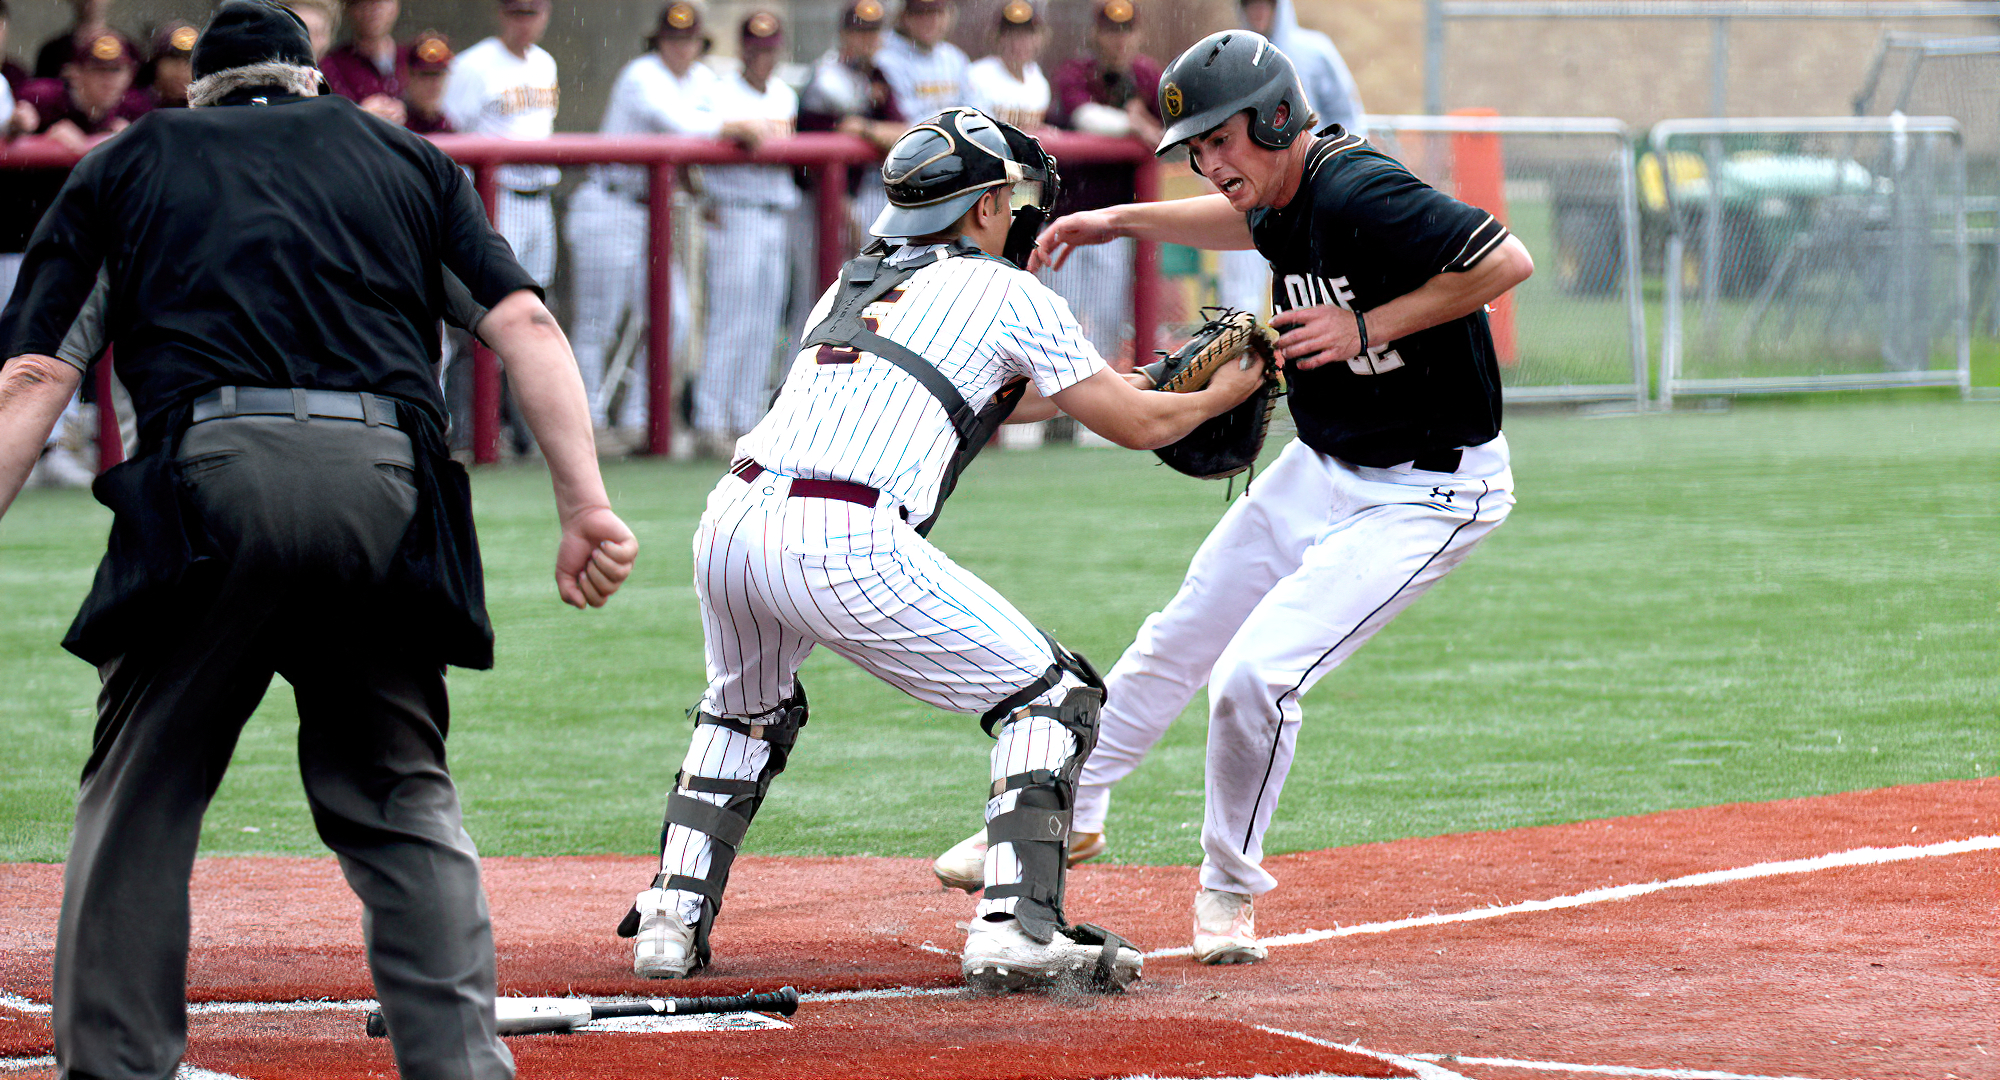 Catcher Carter Mulcahy tags out a St. Olaf base runner at the plate during the second game of the Cobbers' split with the Oles.